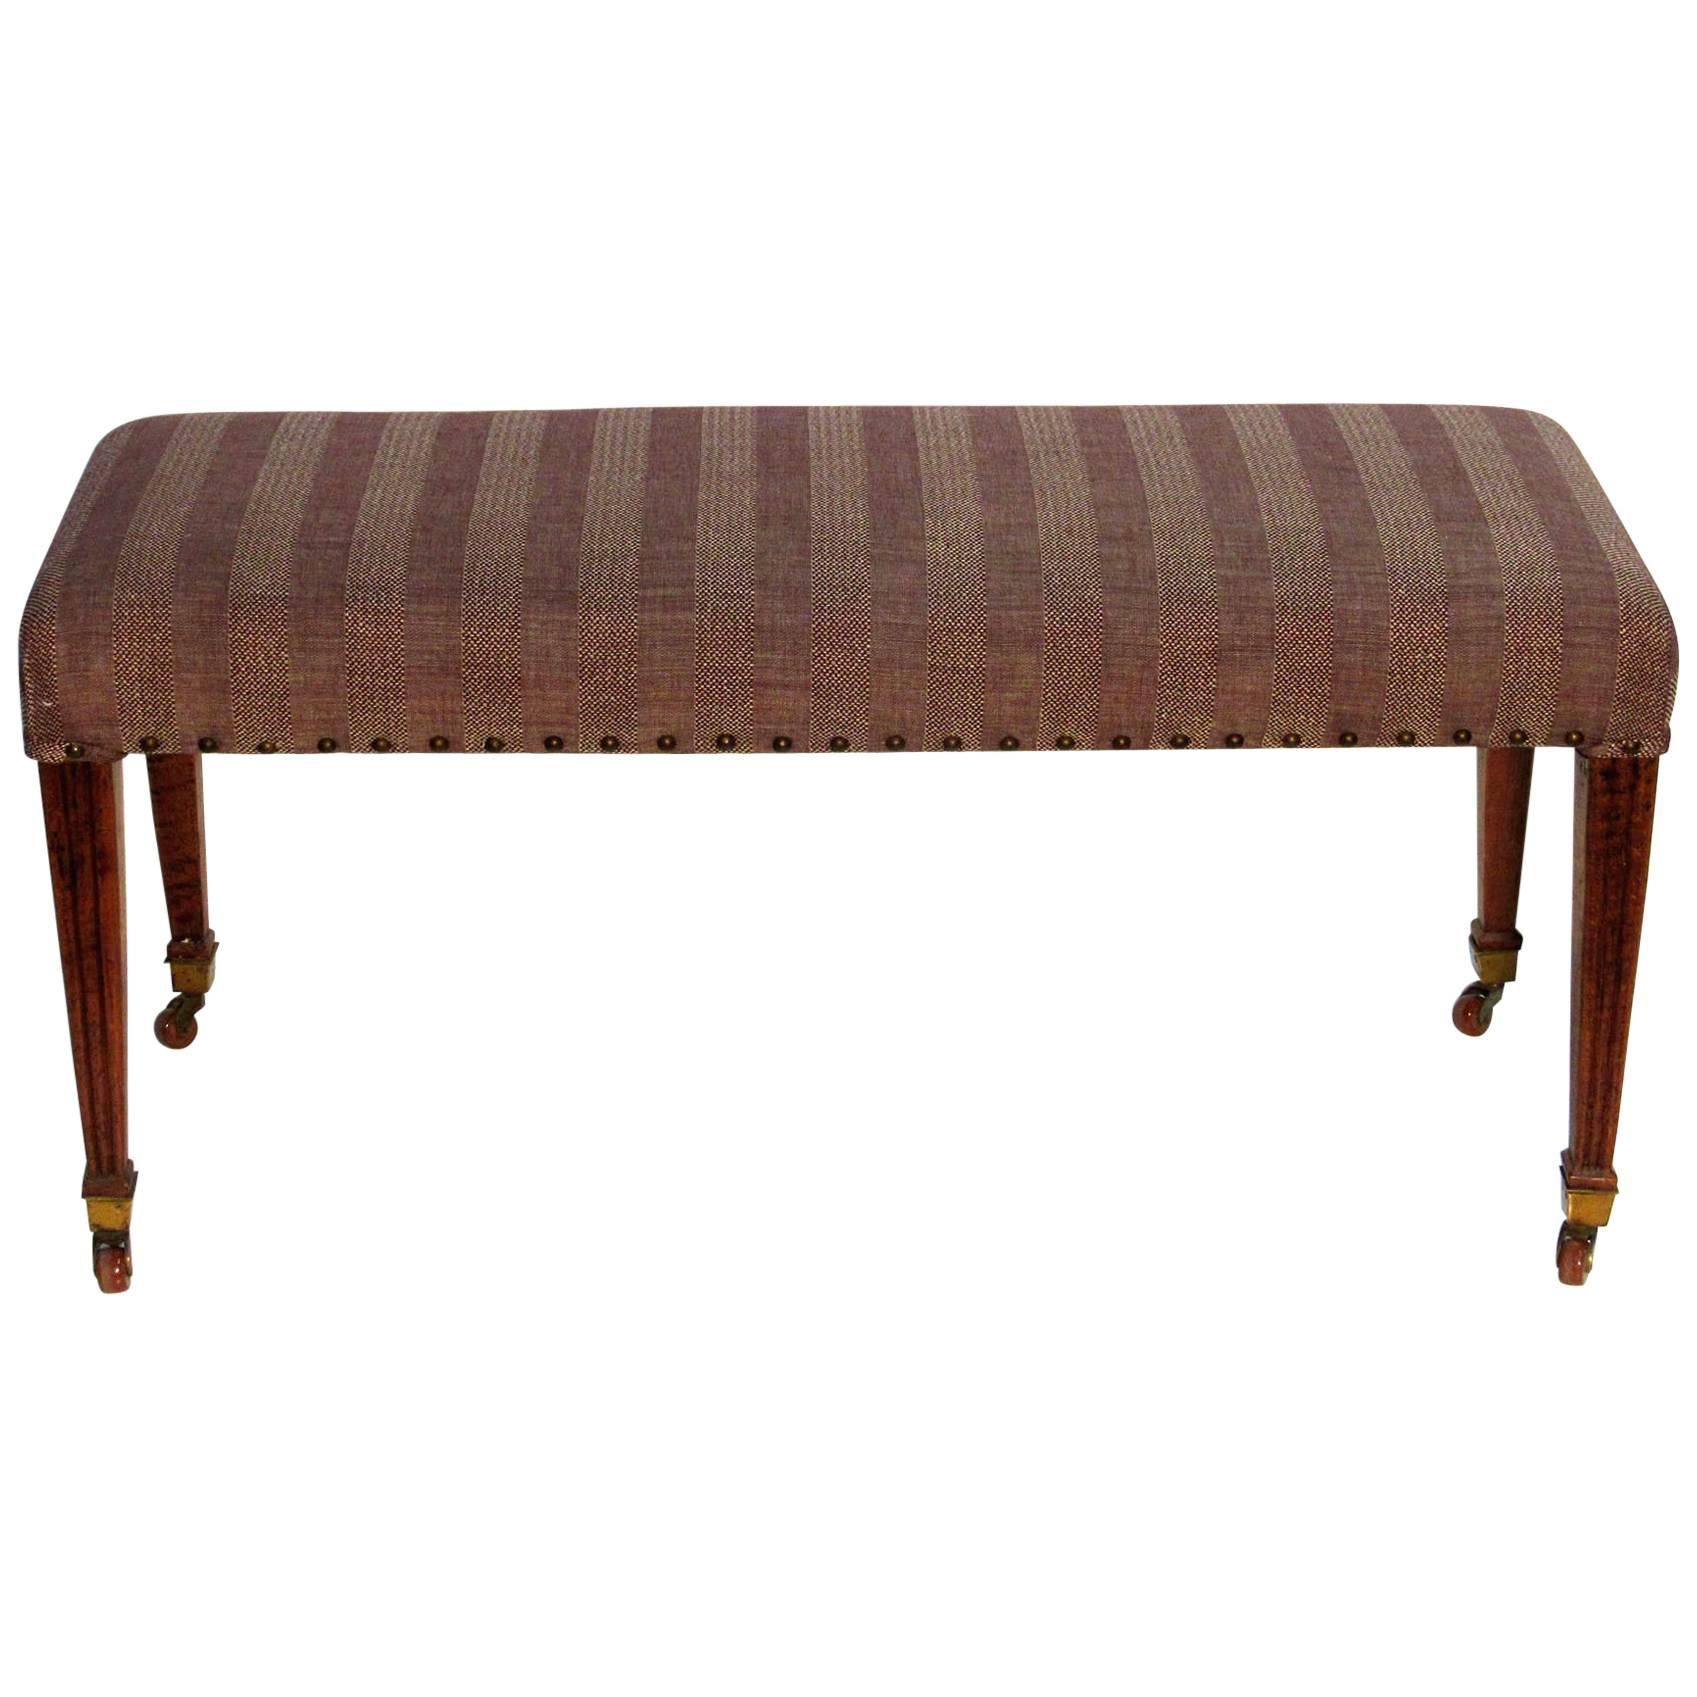 Late 18th-Early 19th Century Italian Bench For Sale